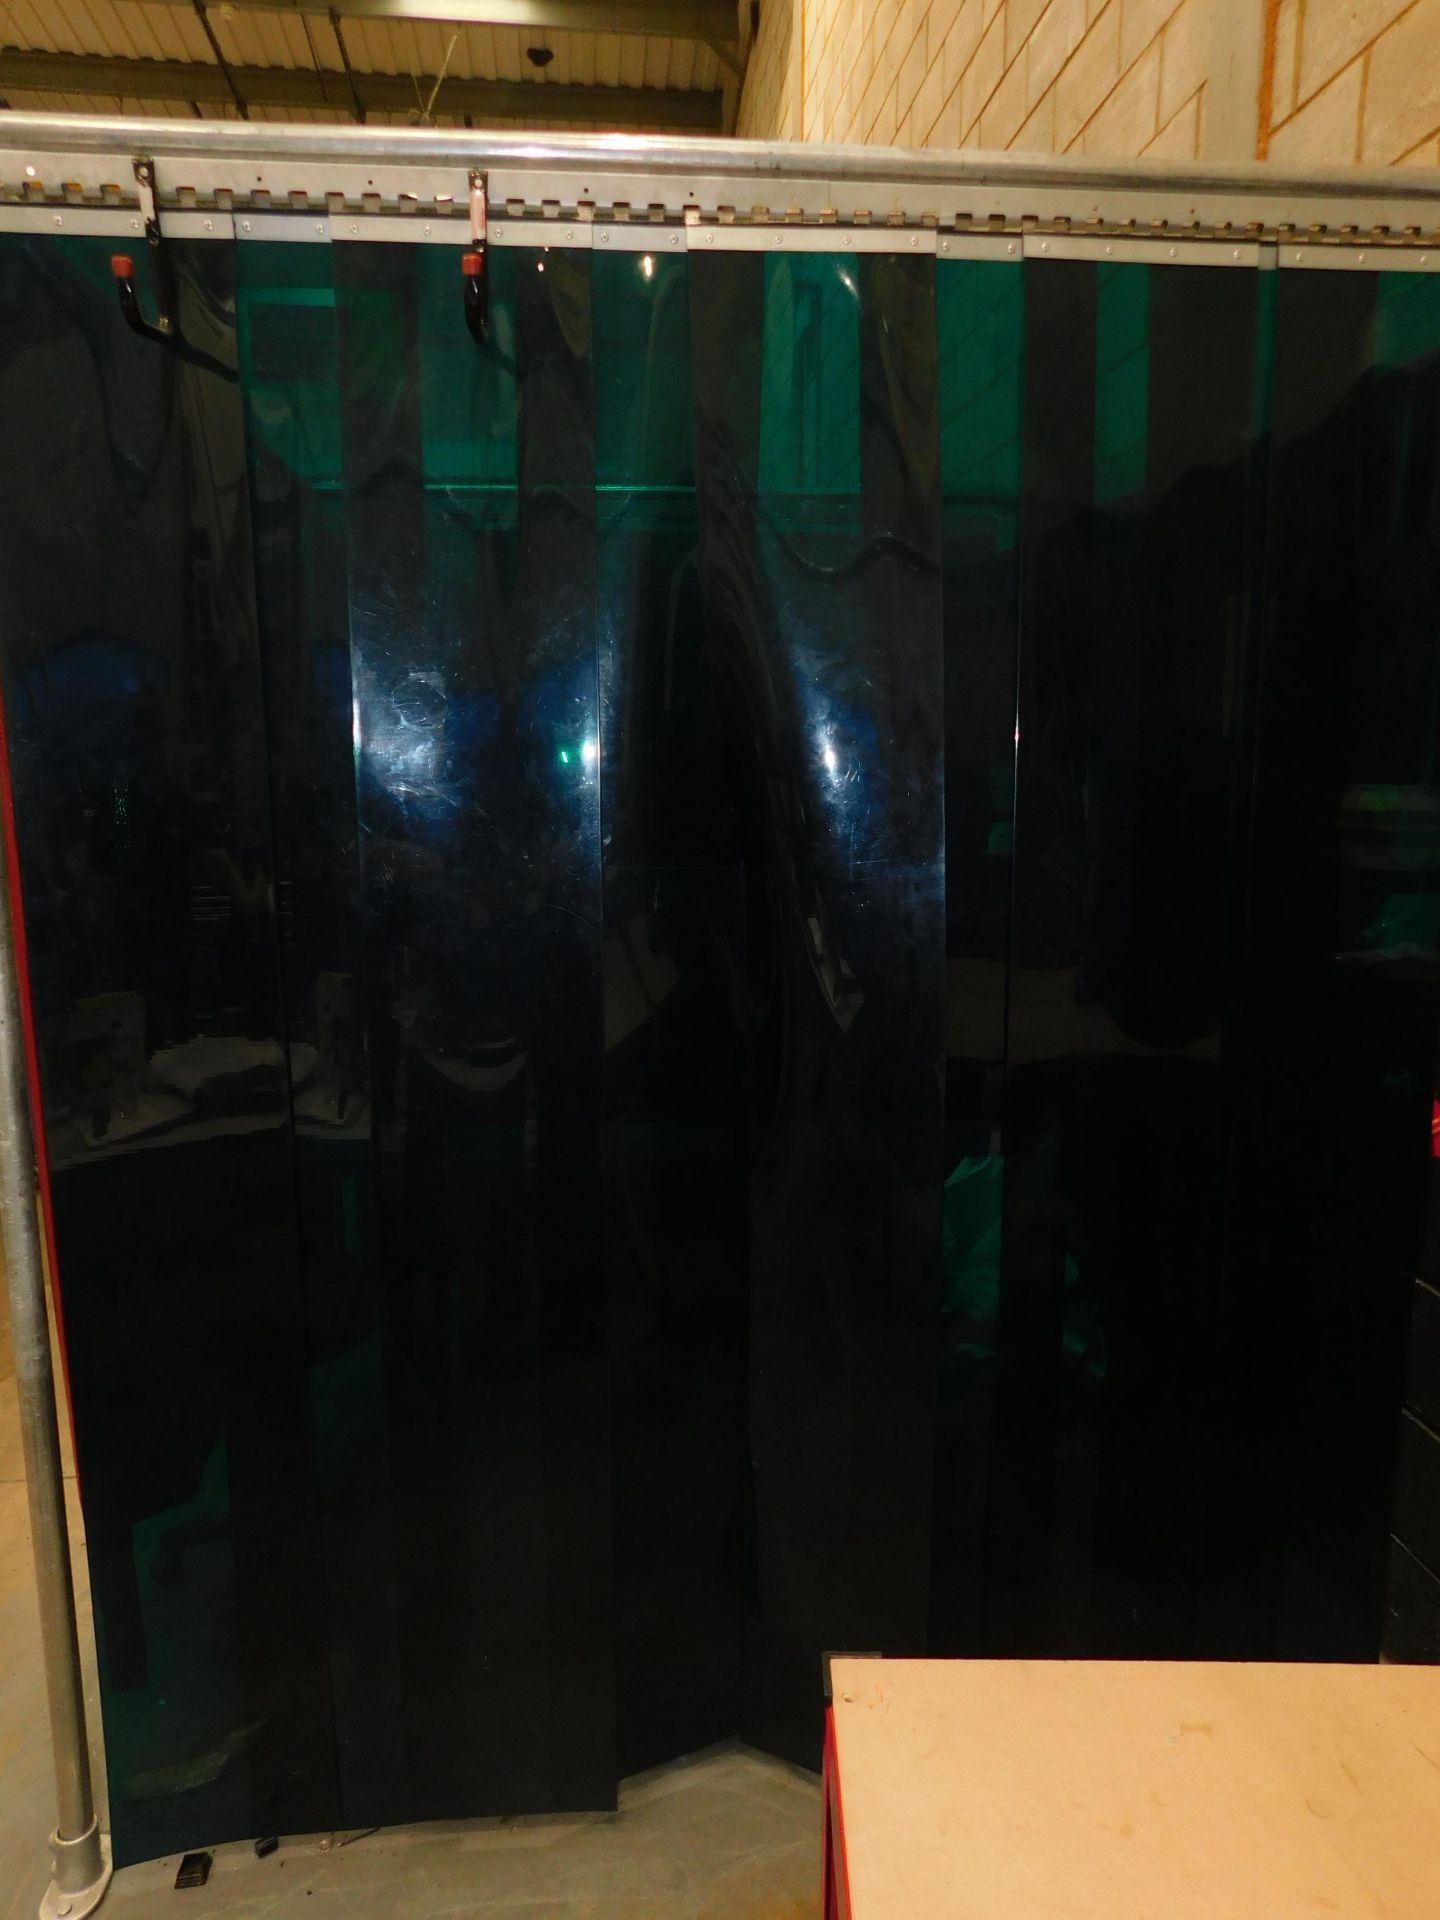 7-Bay Welding Station with 7 Bridela Curtains & PVC Strip Curtain Dividers - Image 2 of 2